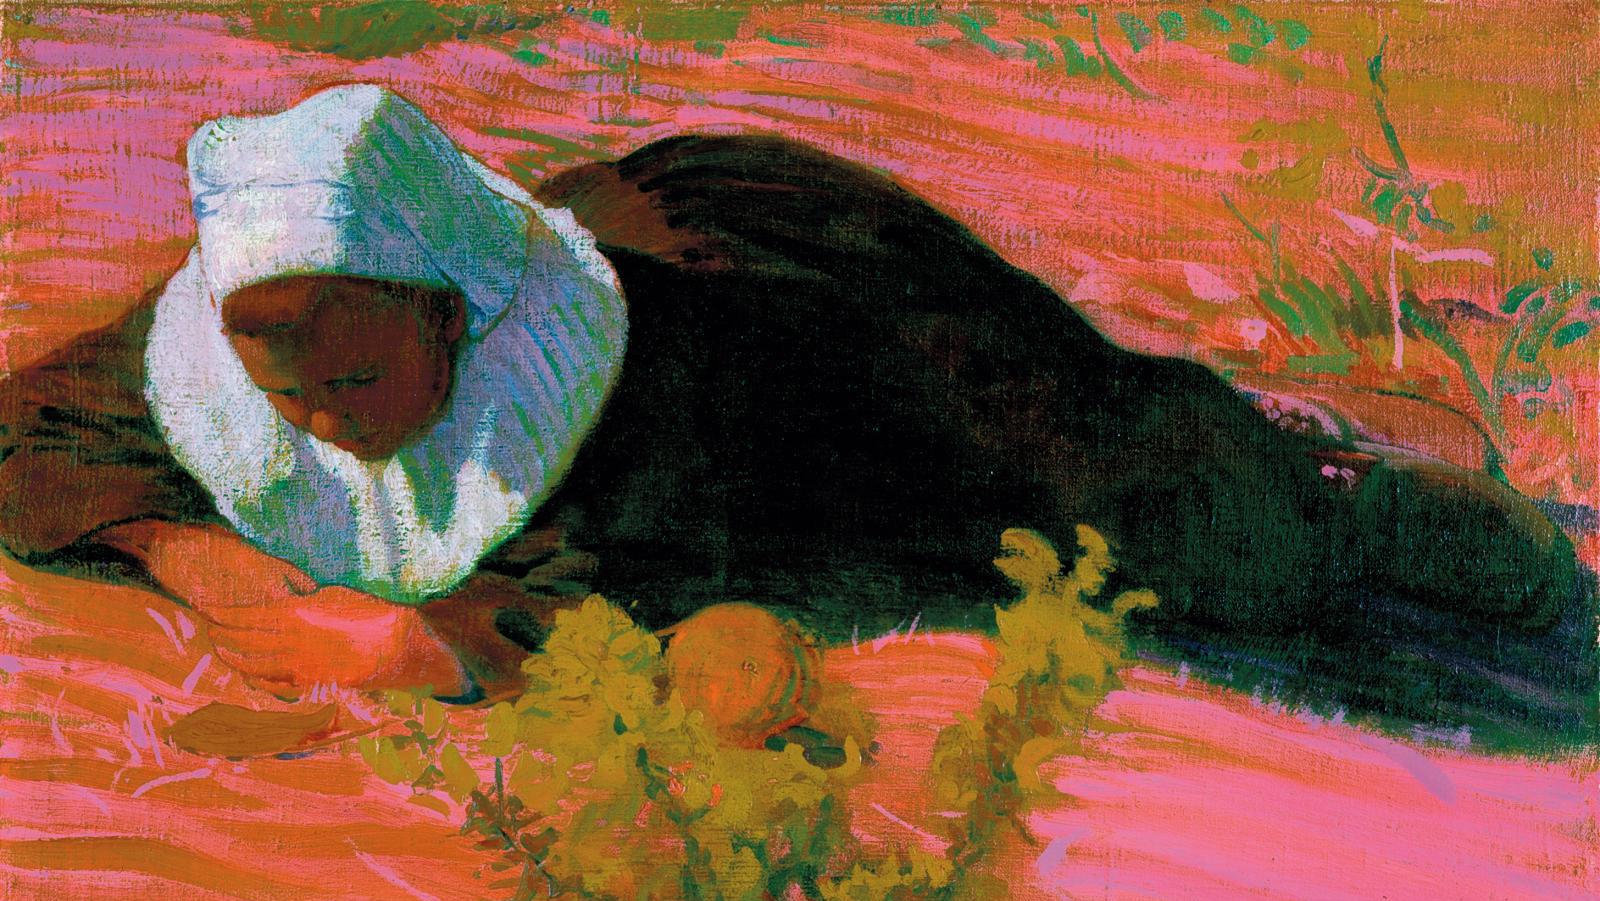 Cuno Amiet (1868-1961), Liegende Bretonin (Breton Woman Lying Down), 1893, oil on... The Swiss Exception at the Musée d’Orsay